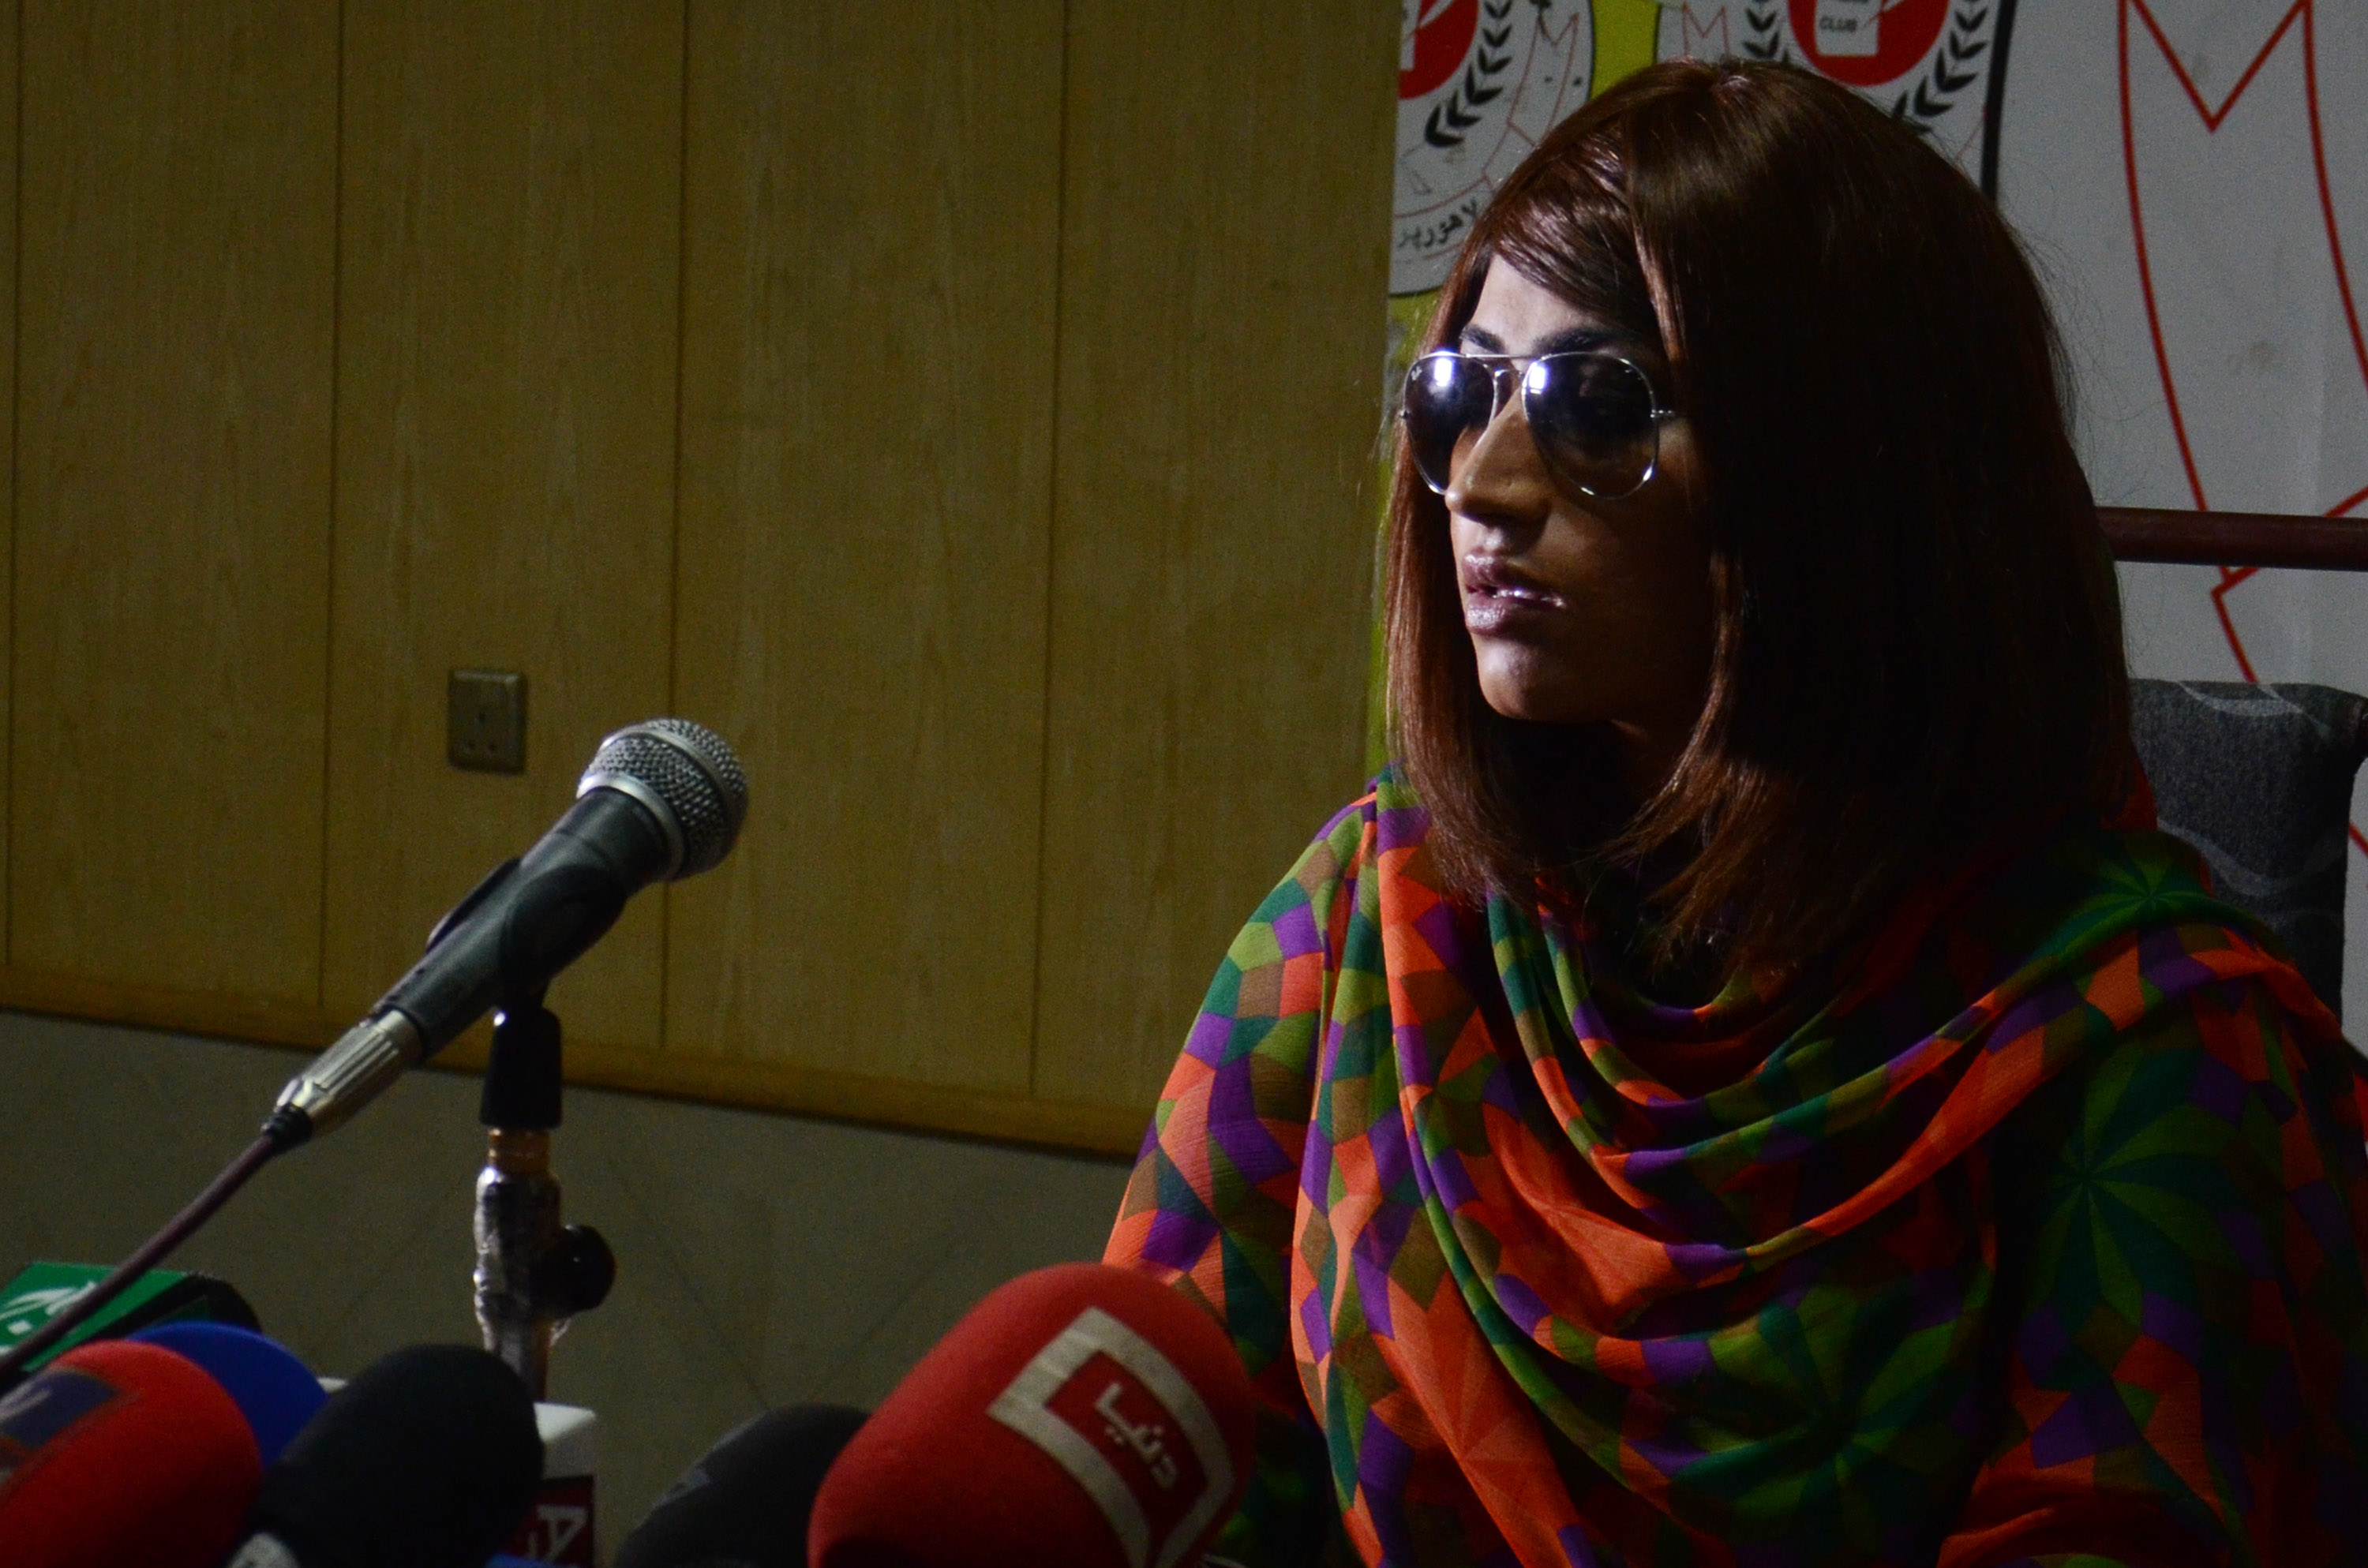 Late Pakistani actress and model Qandeel Baloch addresses the media on June 28, 2016. On July 15, 2016, her brother killed her because "she was bringing dishonor to [his] family." (Rana Sajid Hussain—Pacific Press/LightRocket/Getty Images)